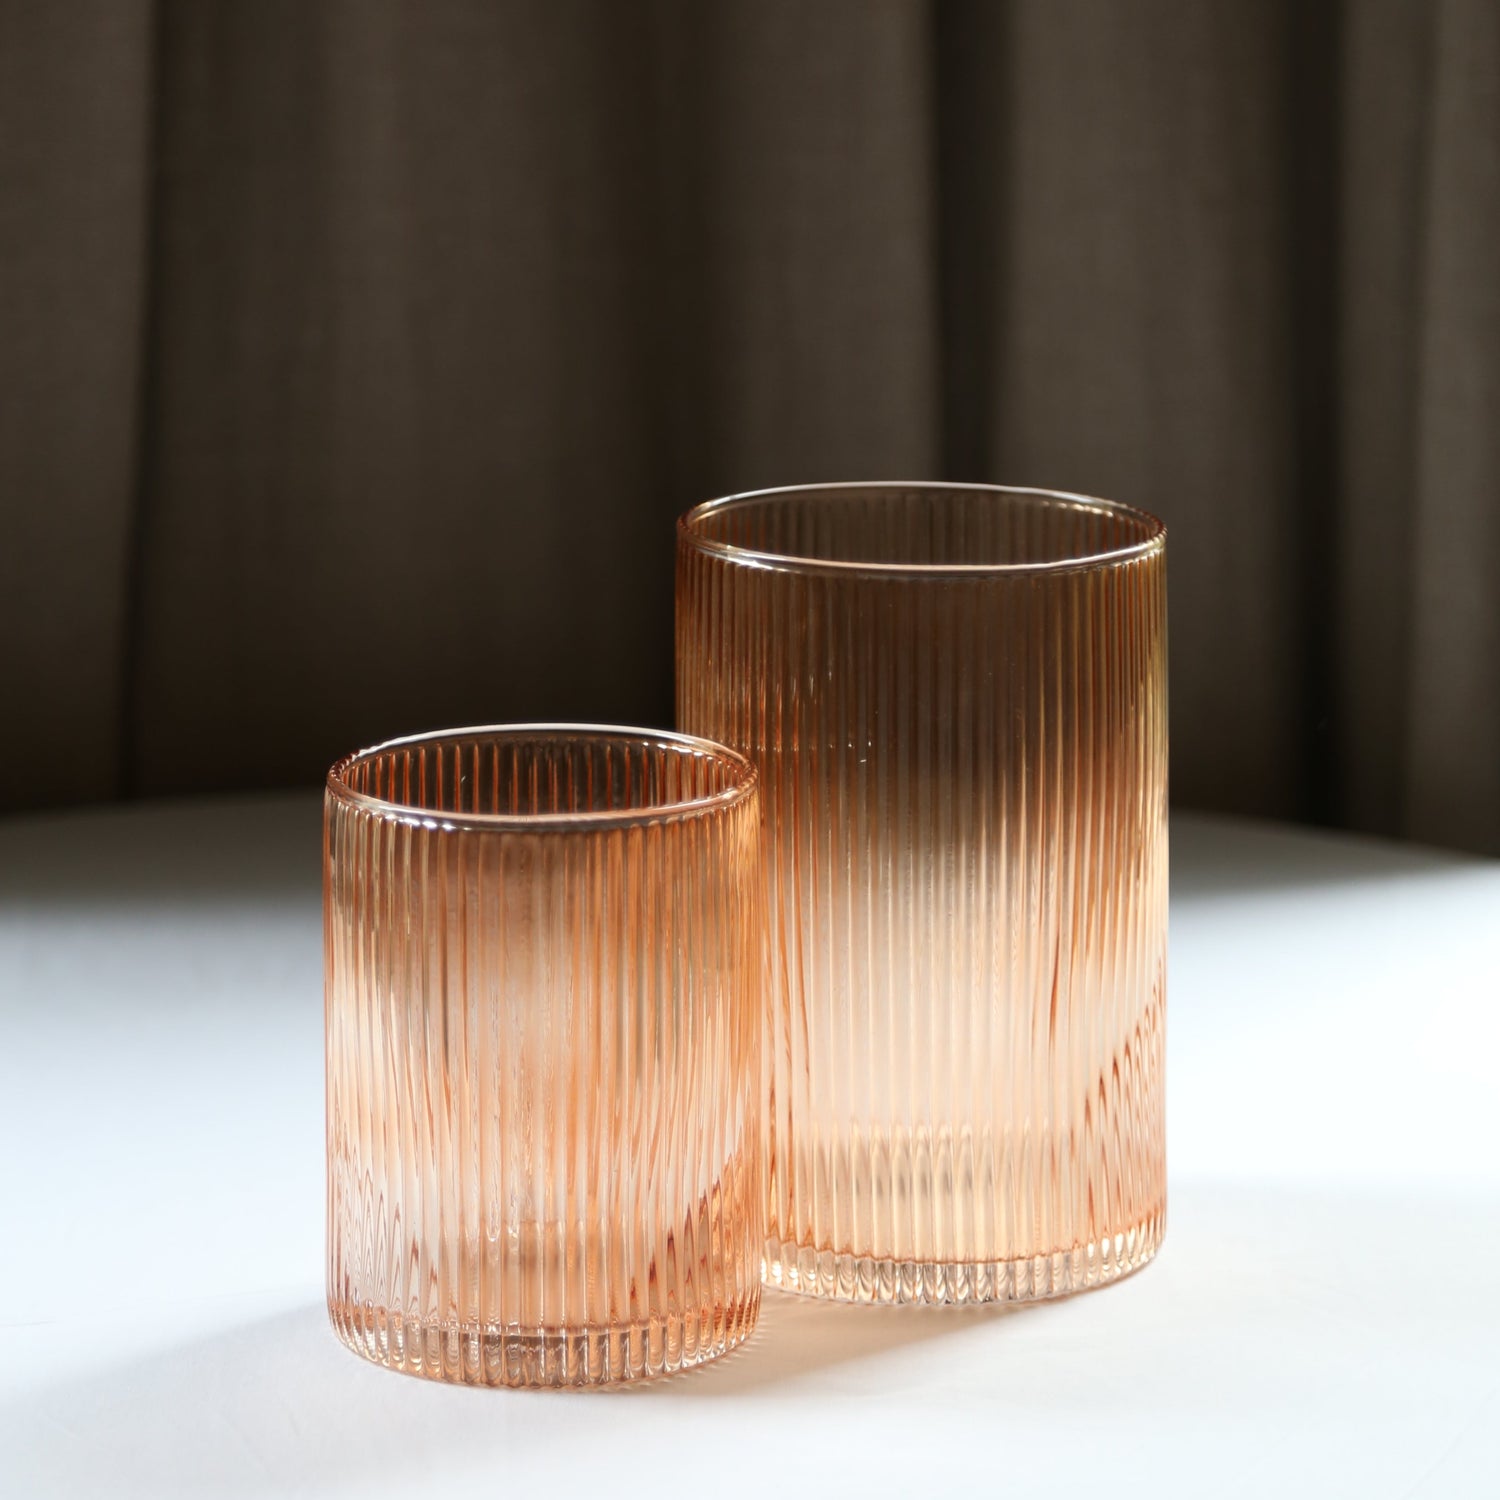 Bellini amber glass vases available at Rook & Rose.